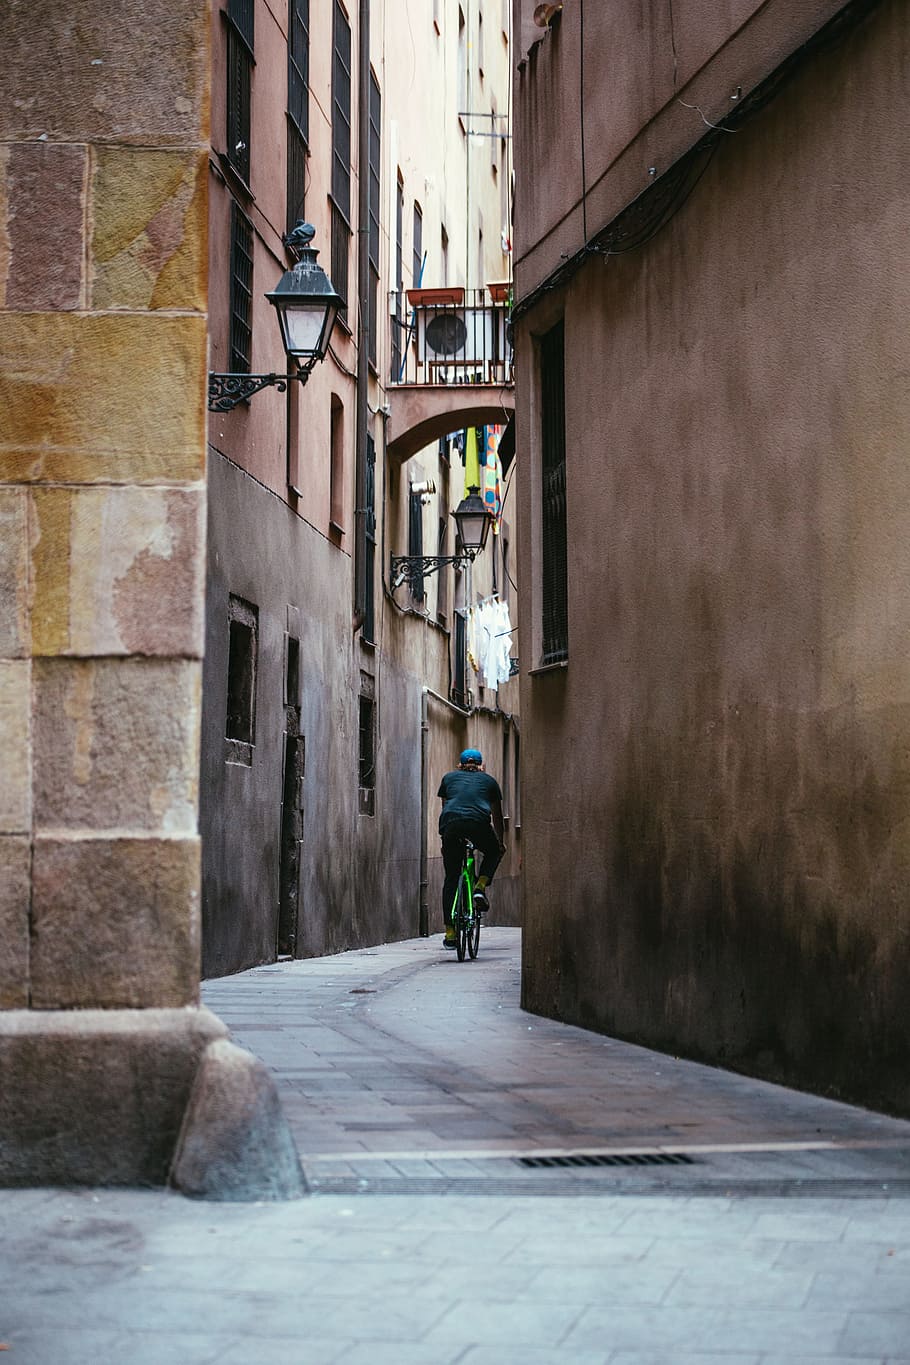 A young cyclist riding his bicycle in a narrow street, Architecture